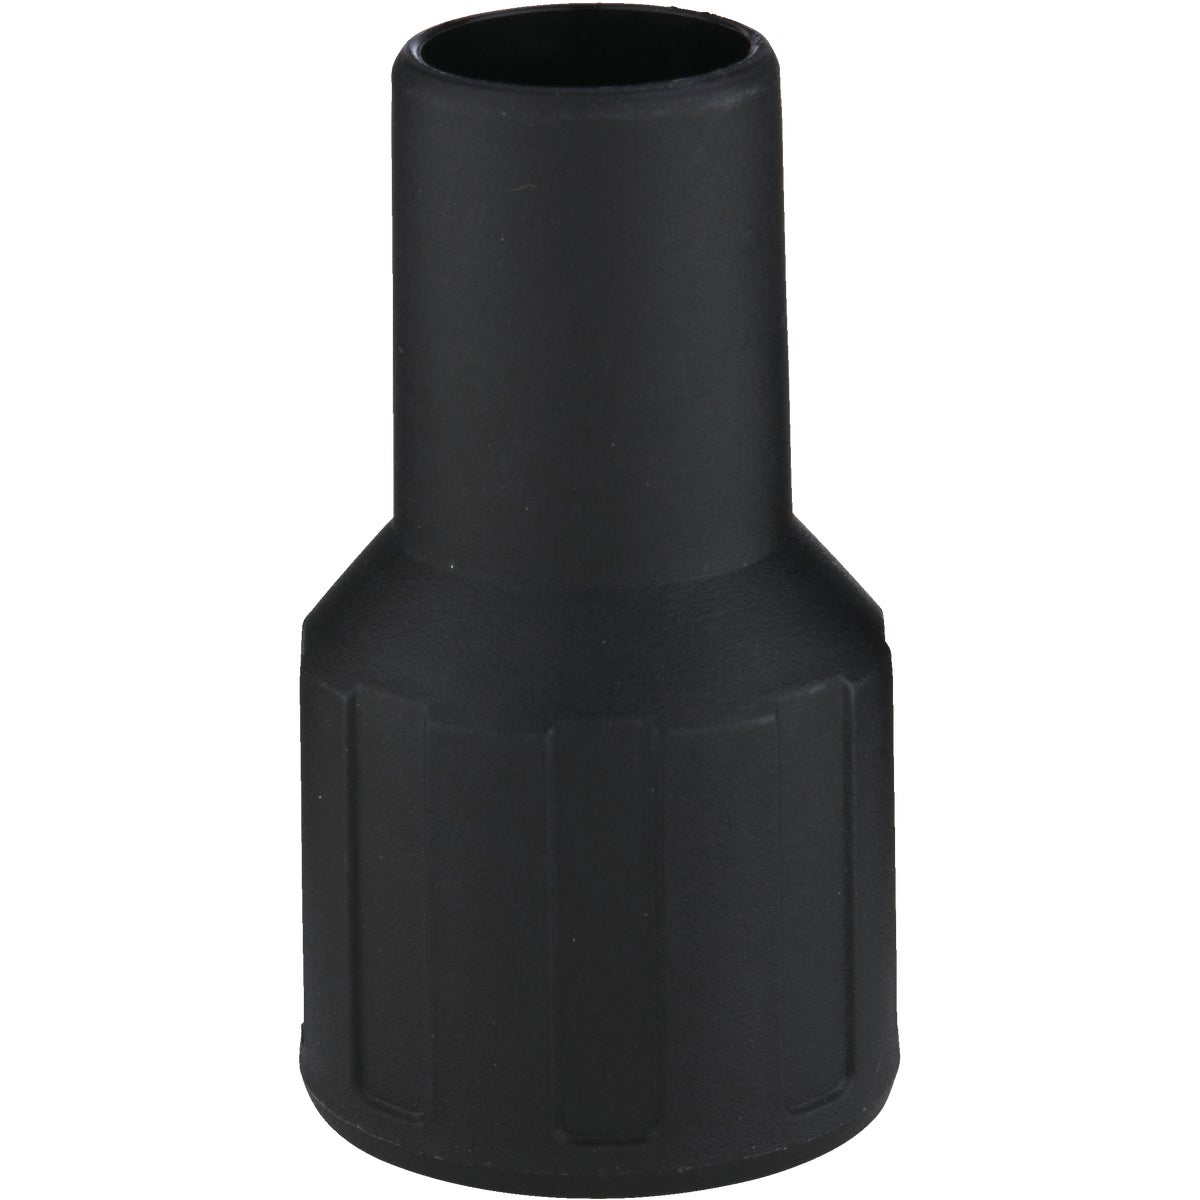 Item 300941, Vacuum accessory reducer adapter for use with wet/dry vacuum systems.